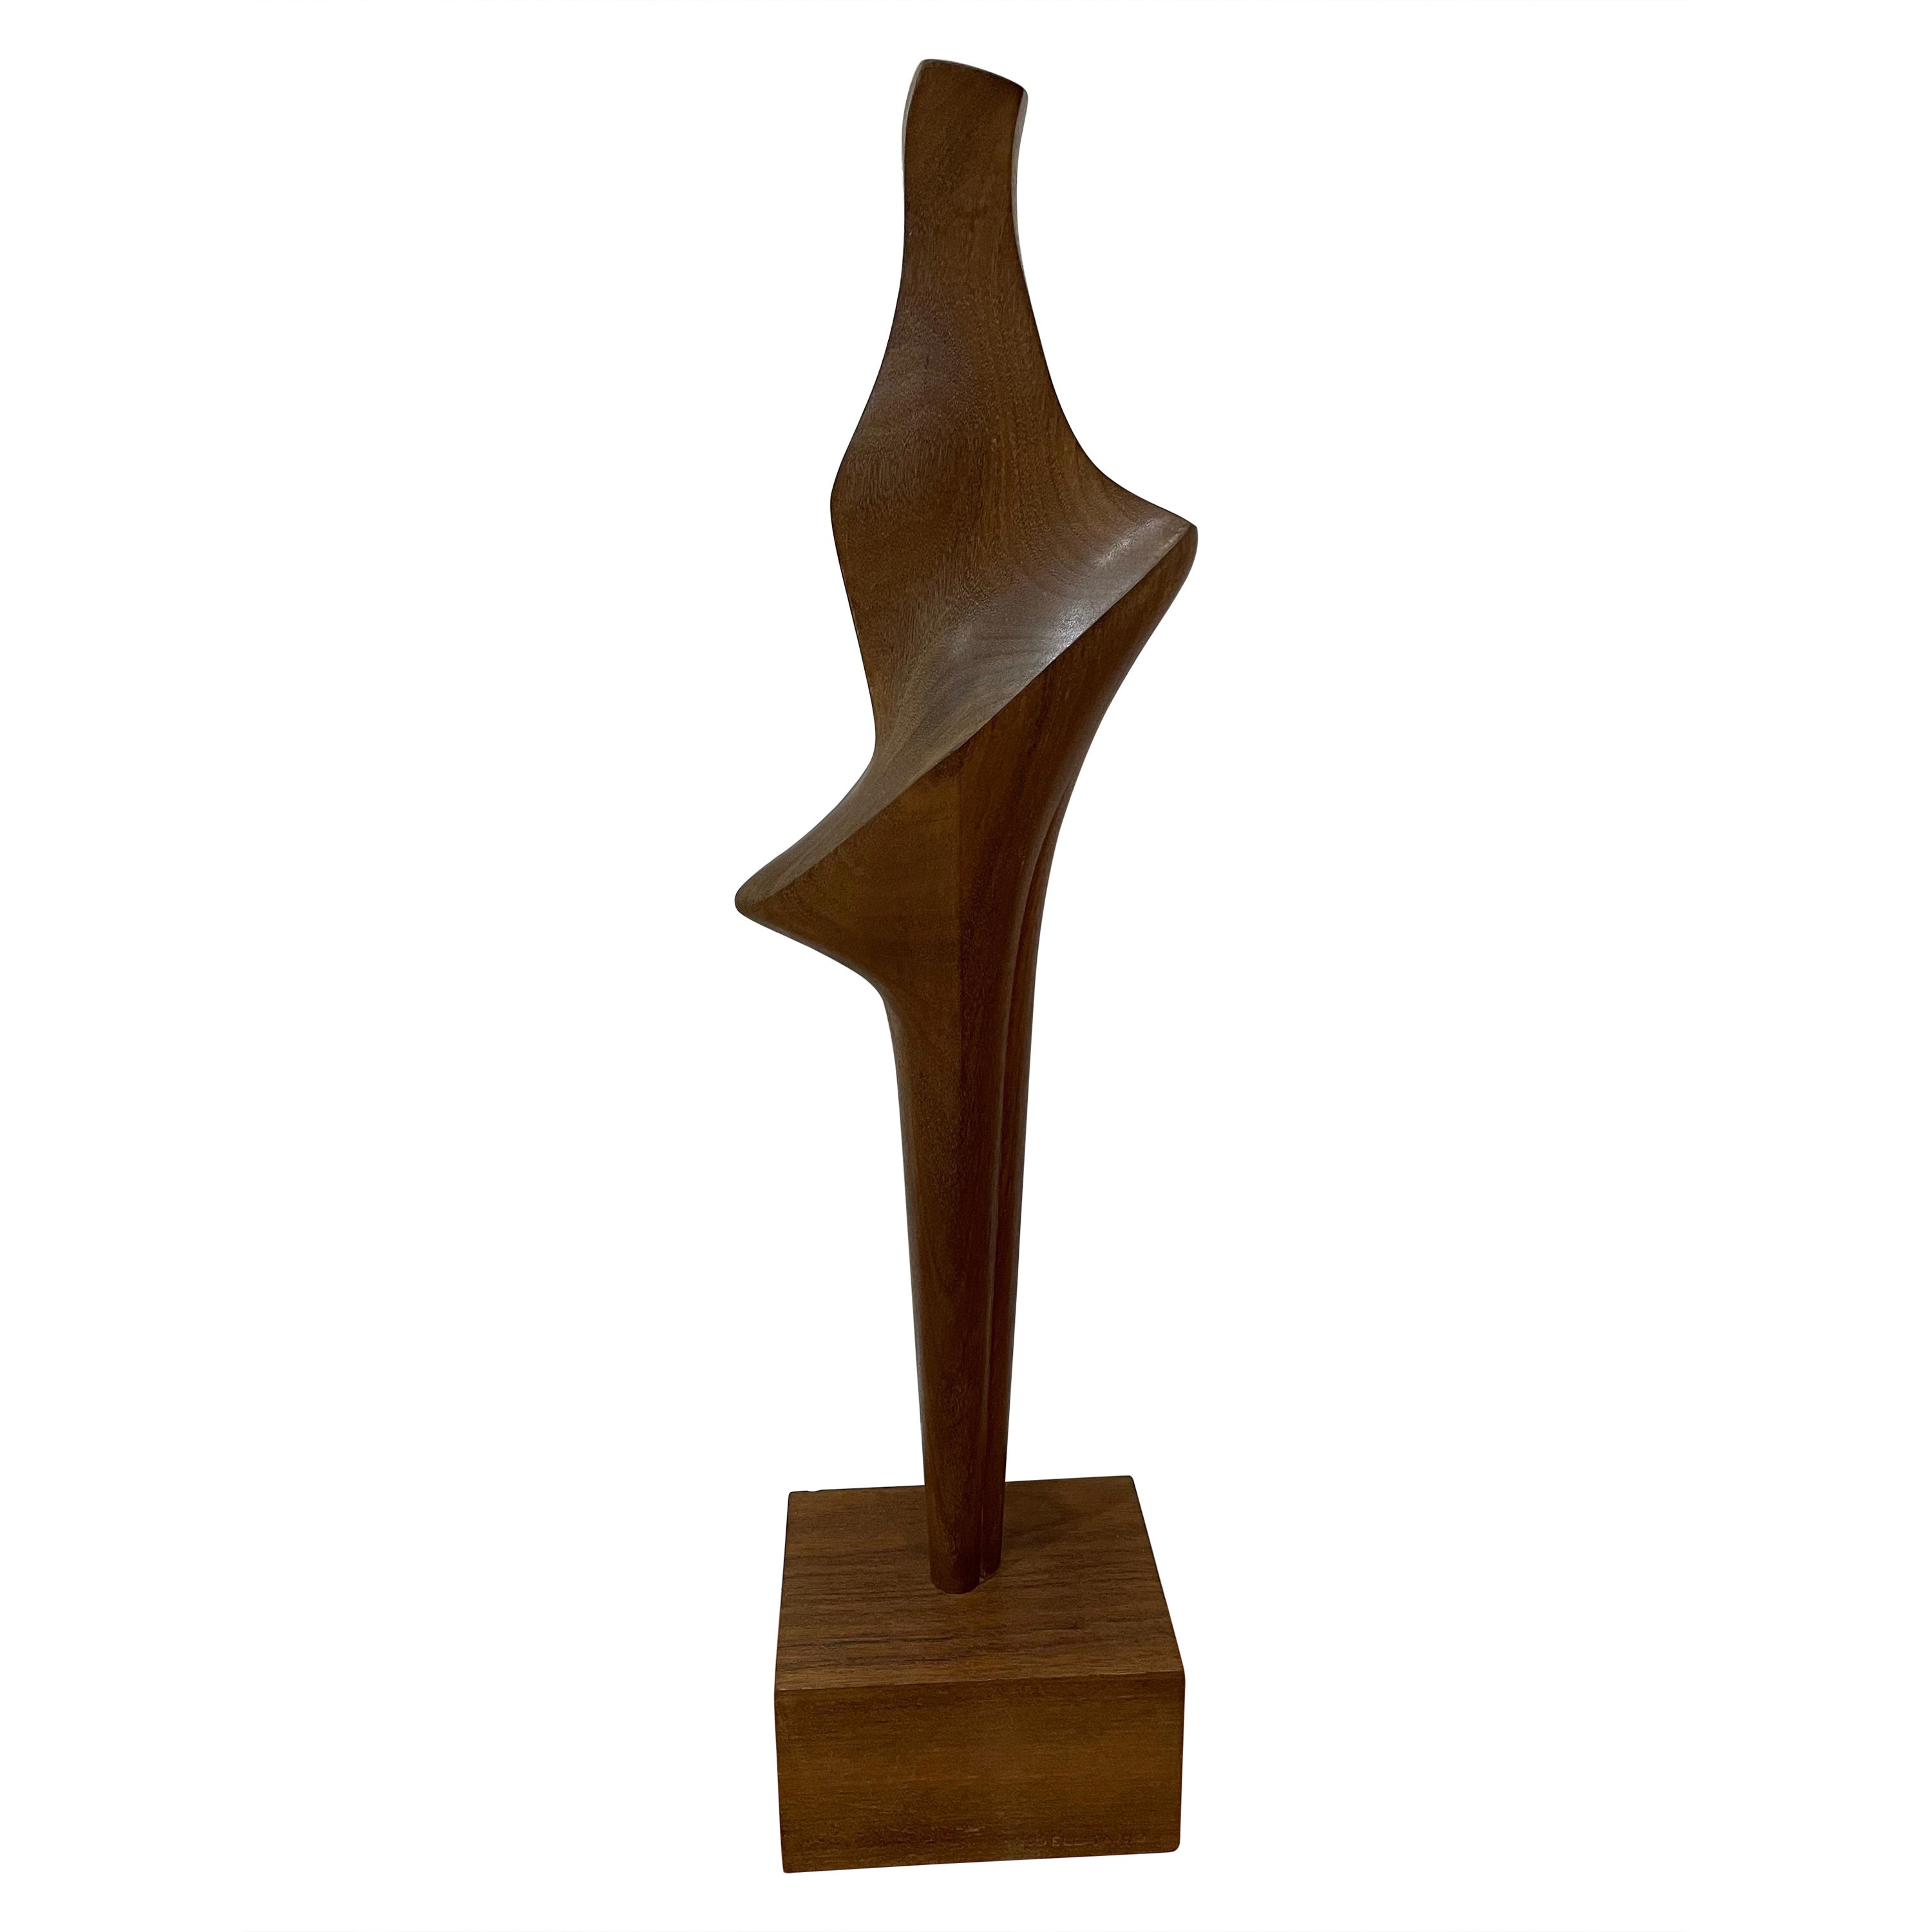 Abstract Walnut Wood Sculpture by Vincent Bellisario